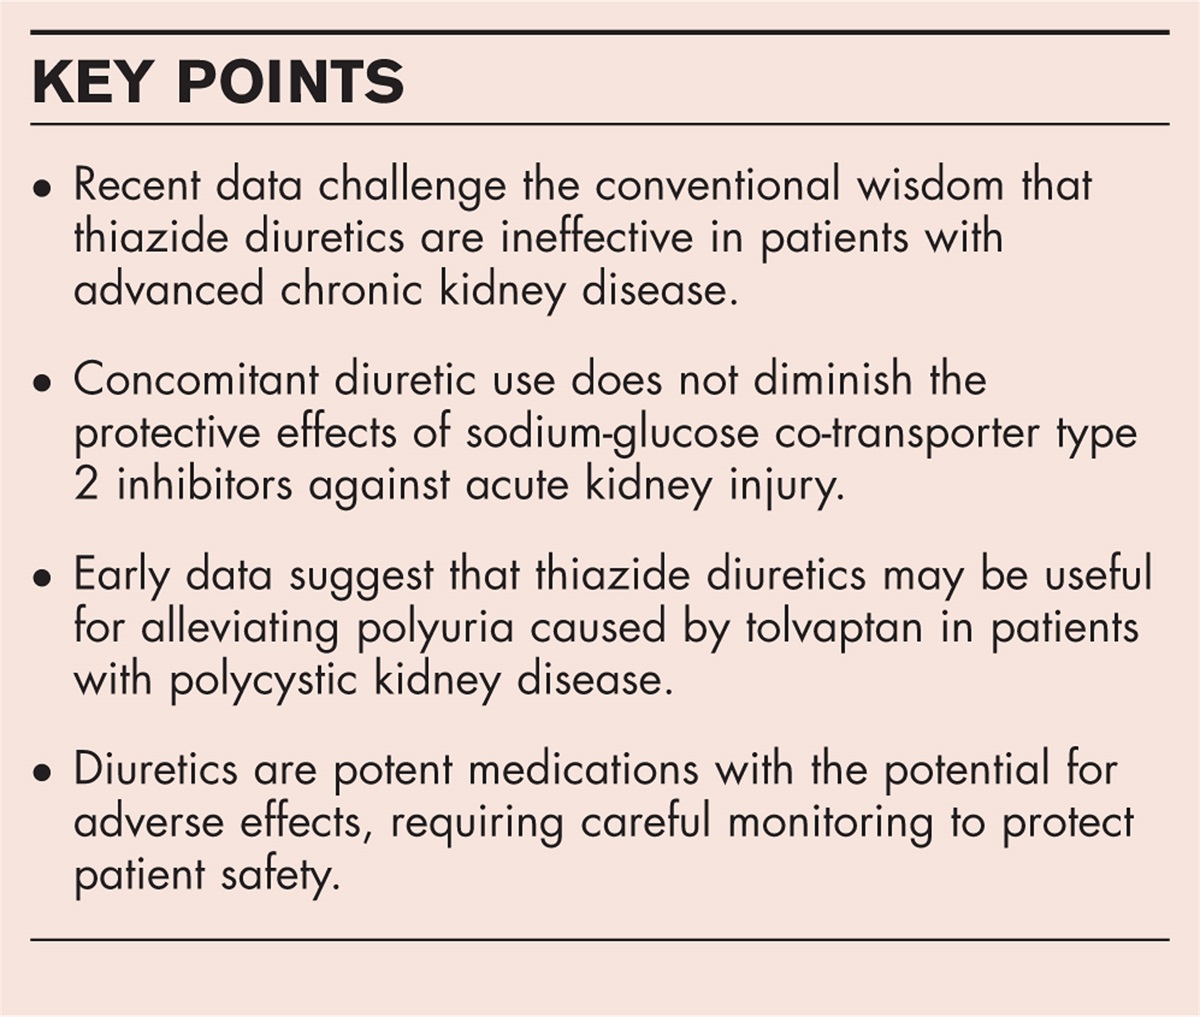 Revisiting diuretic choice in chronic kidney disease